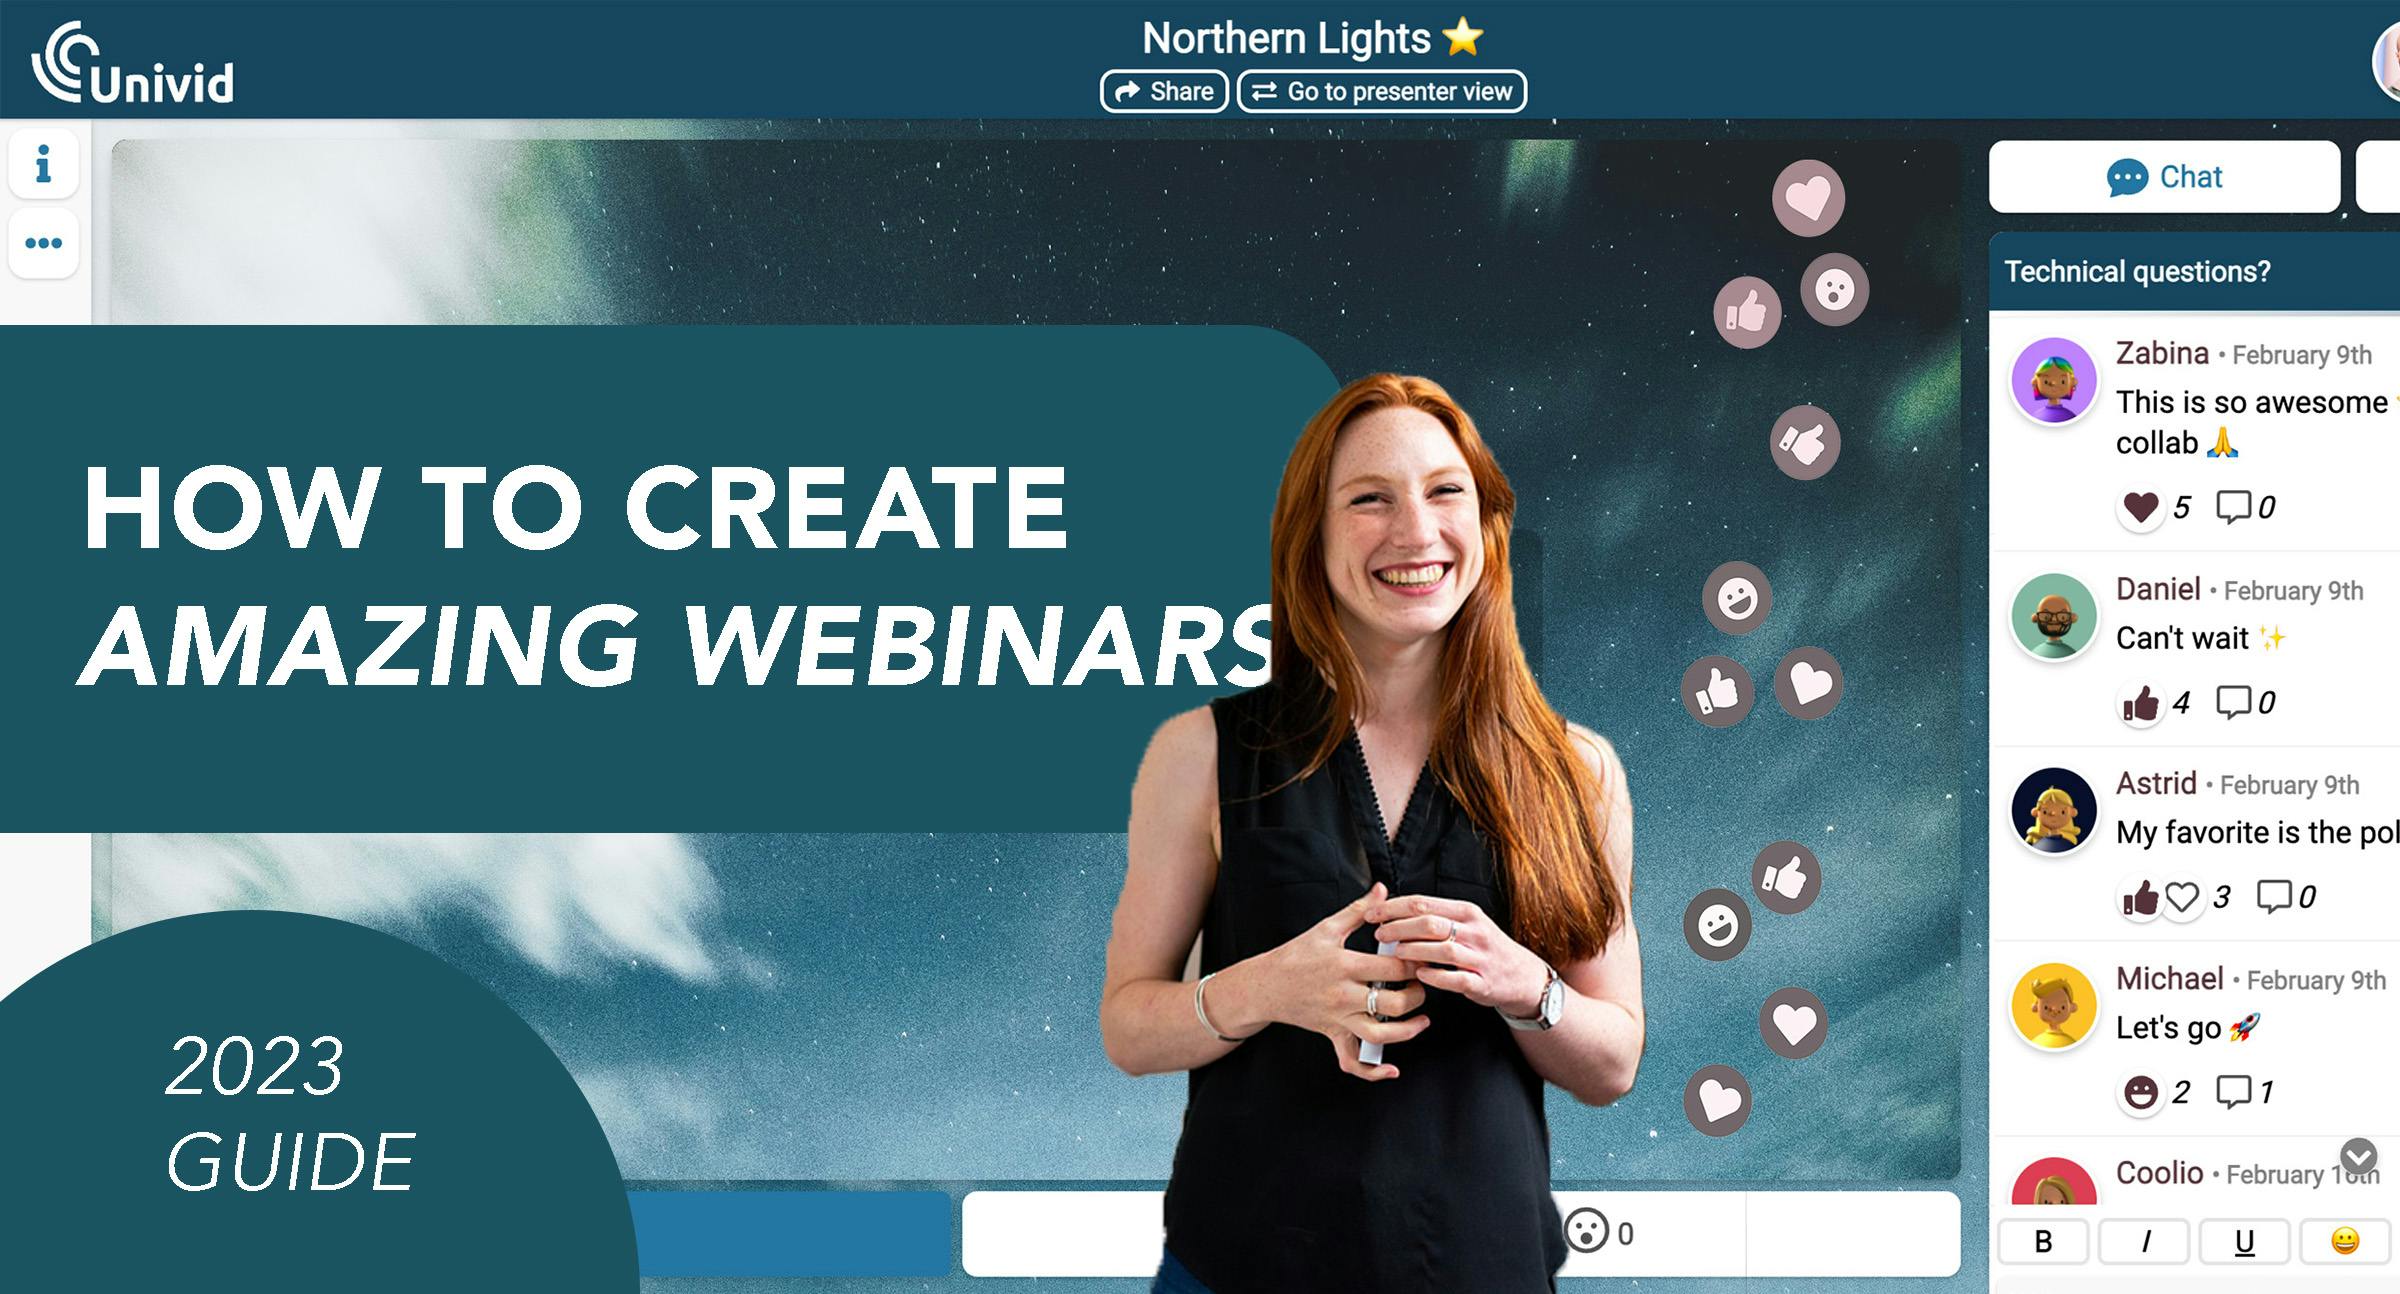 Have you ever thought about hosting a webinar to engage your customers and potential leads? The benefits of a webinar that both impresses and engages the attendees are many - let's dive into how to create an amazing webinar in 2023.